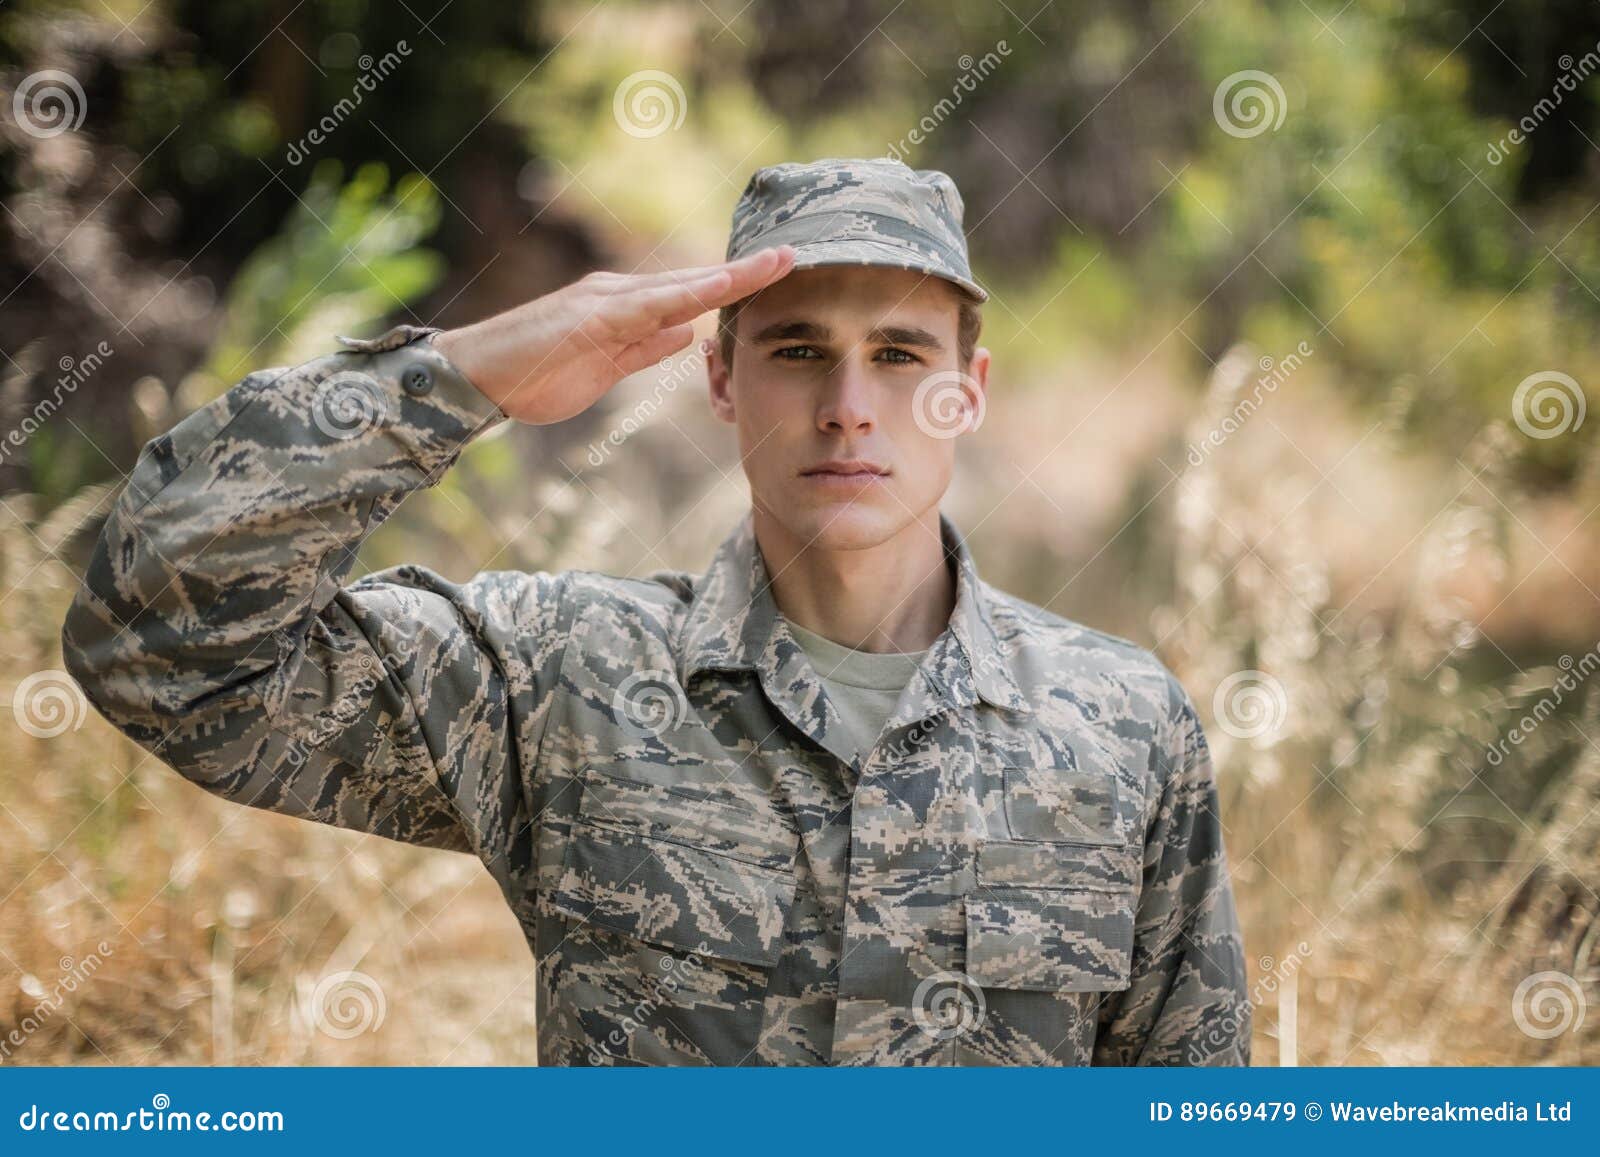 portrait of military soldier giving salute